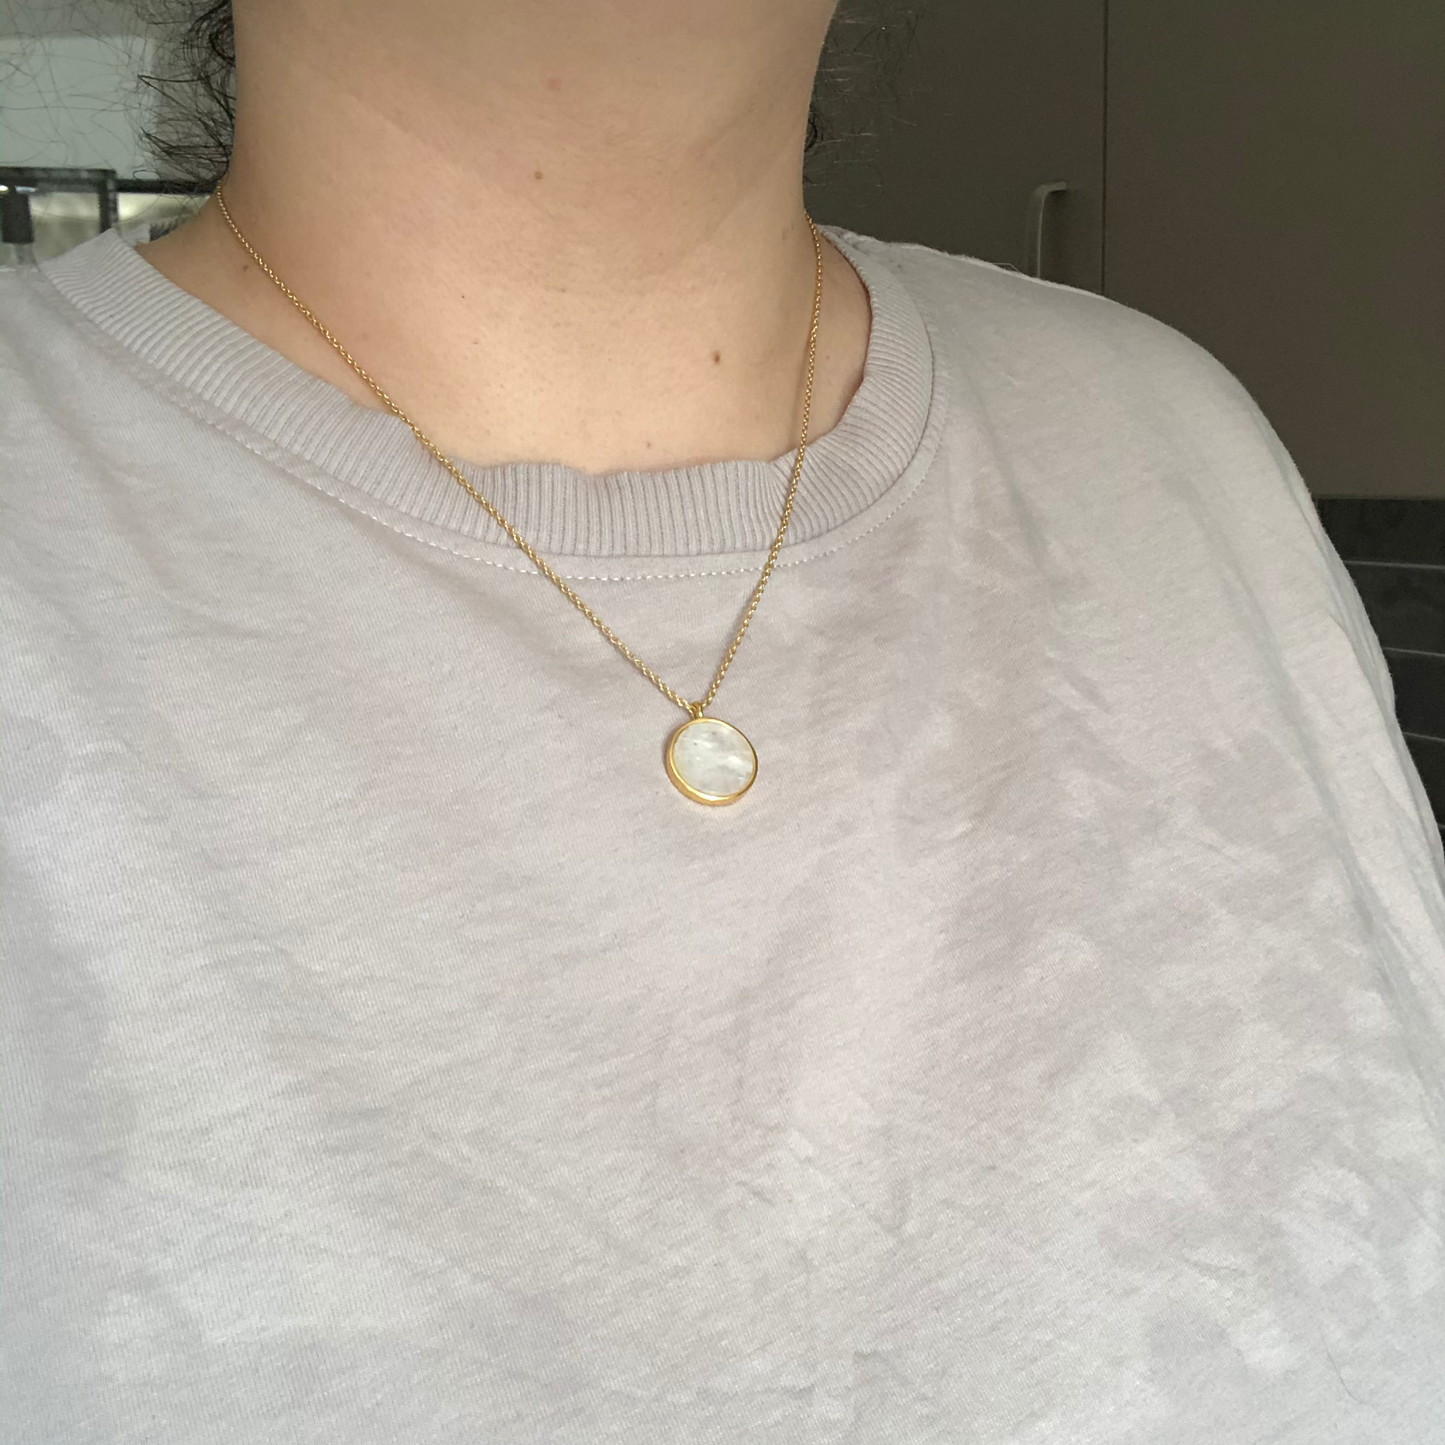 Moonstone Gemstone Coin Necklace